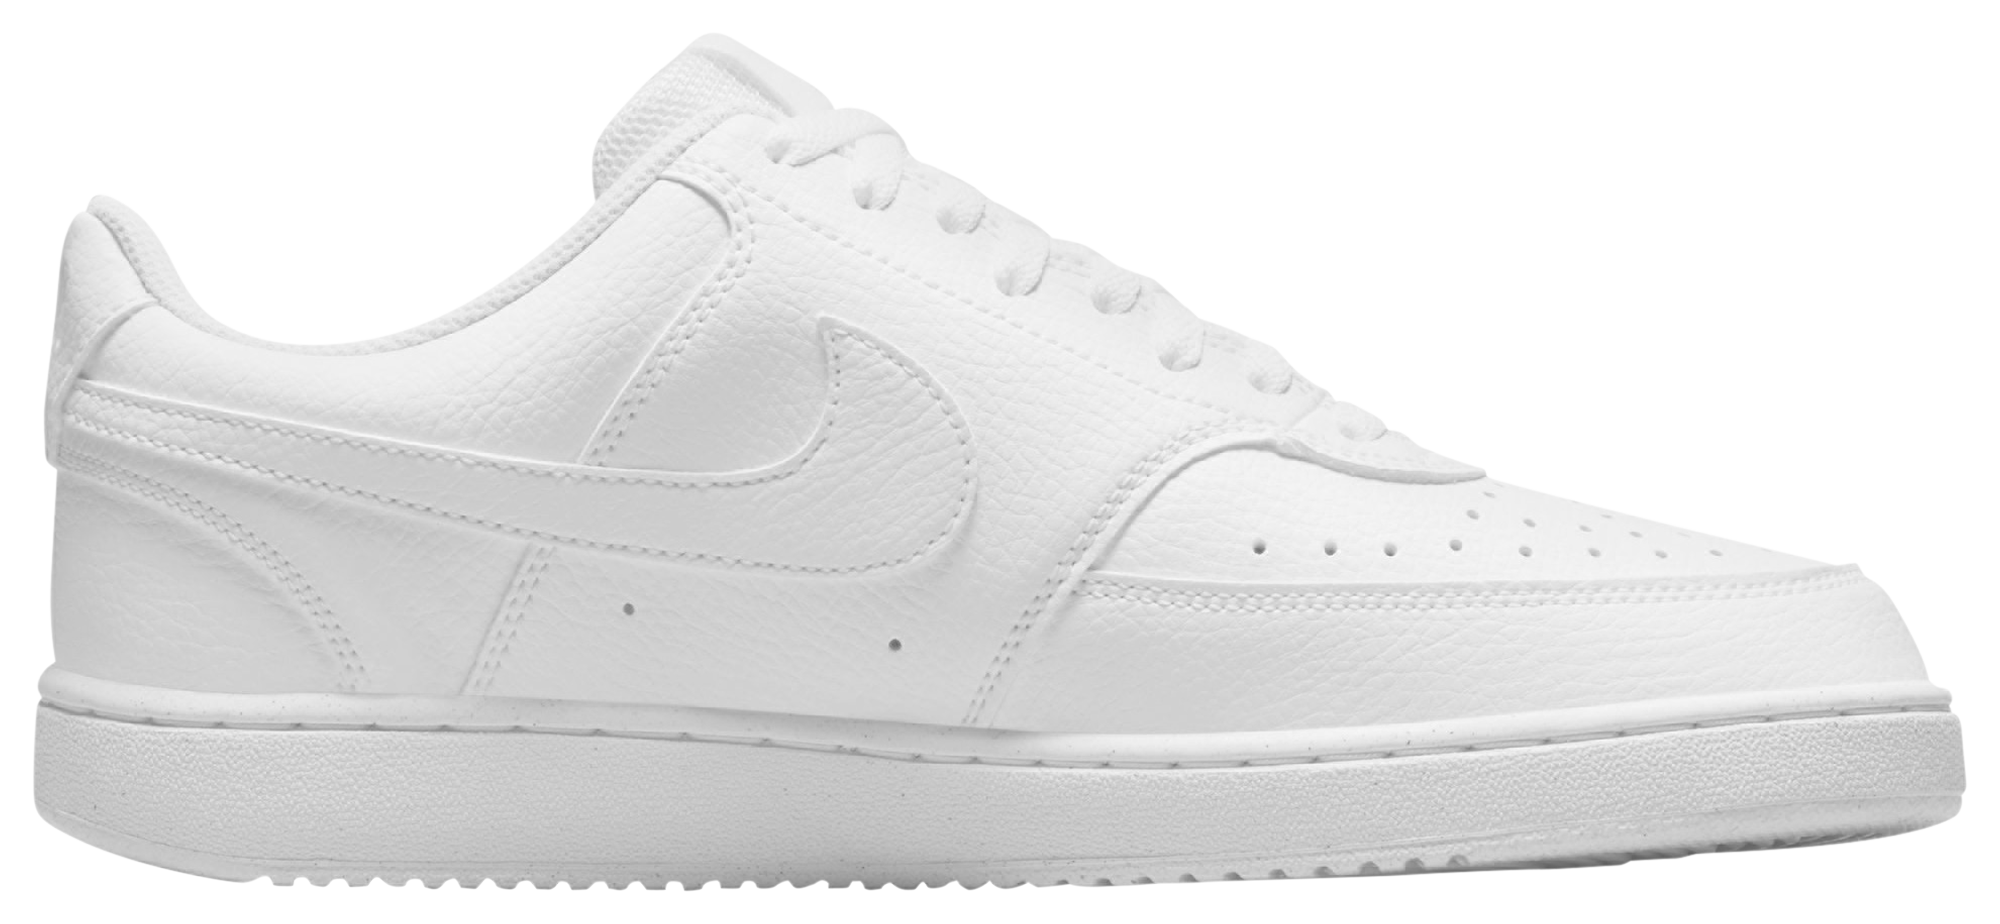 Court vision low next nature. Nike Court Vision Low белые. Nike Court Vision 1 Low. Nike Court Vision White. Кеды мужские Nike Court Vision Low.